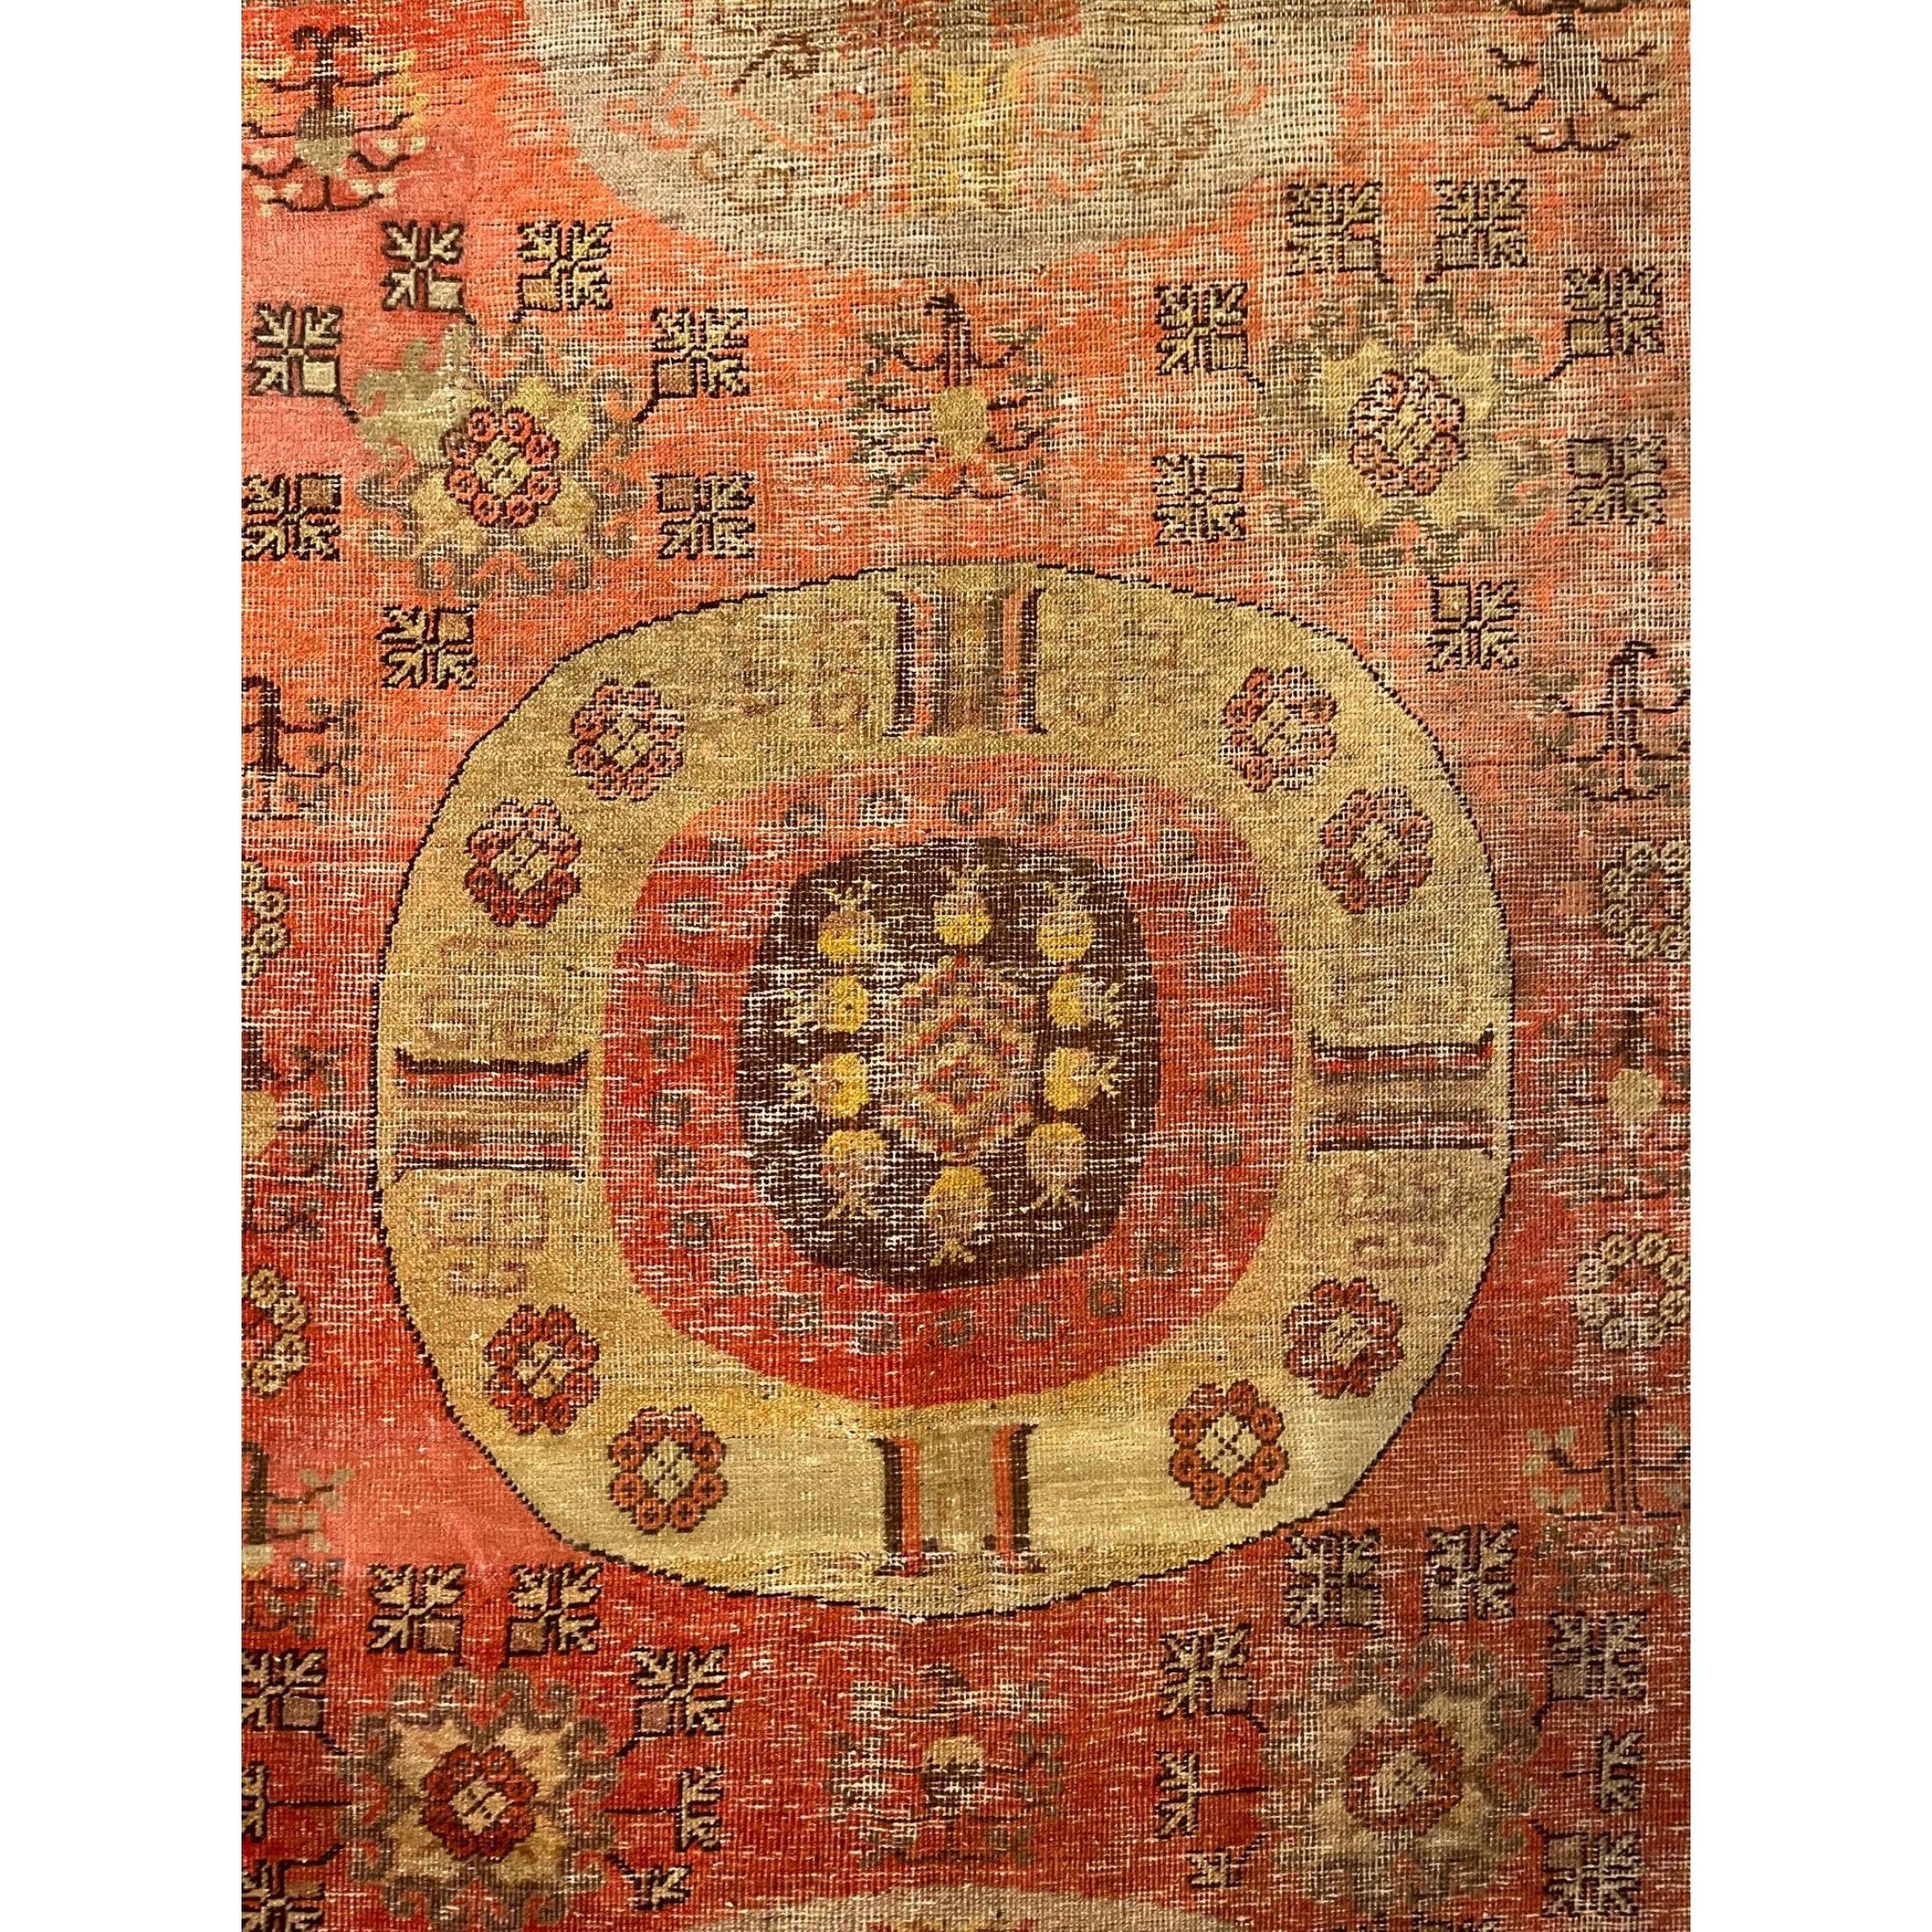 Antique Samarkand Rugs: The desert oasis of Khotan was an important stop on the Silk Road. The people of Khotan were expert carpet weavers who produced high quality antique rugs and carpets for both internal and the commercial trade. Samarkand